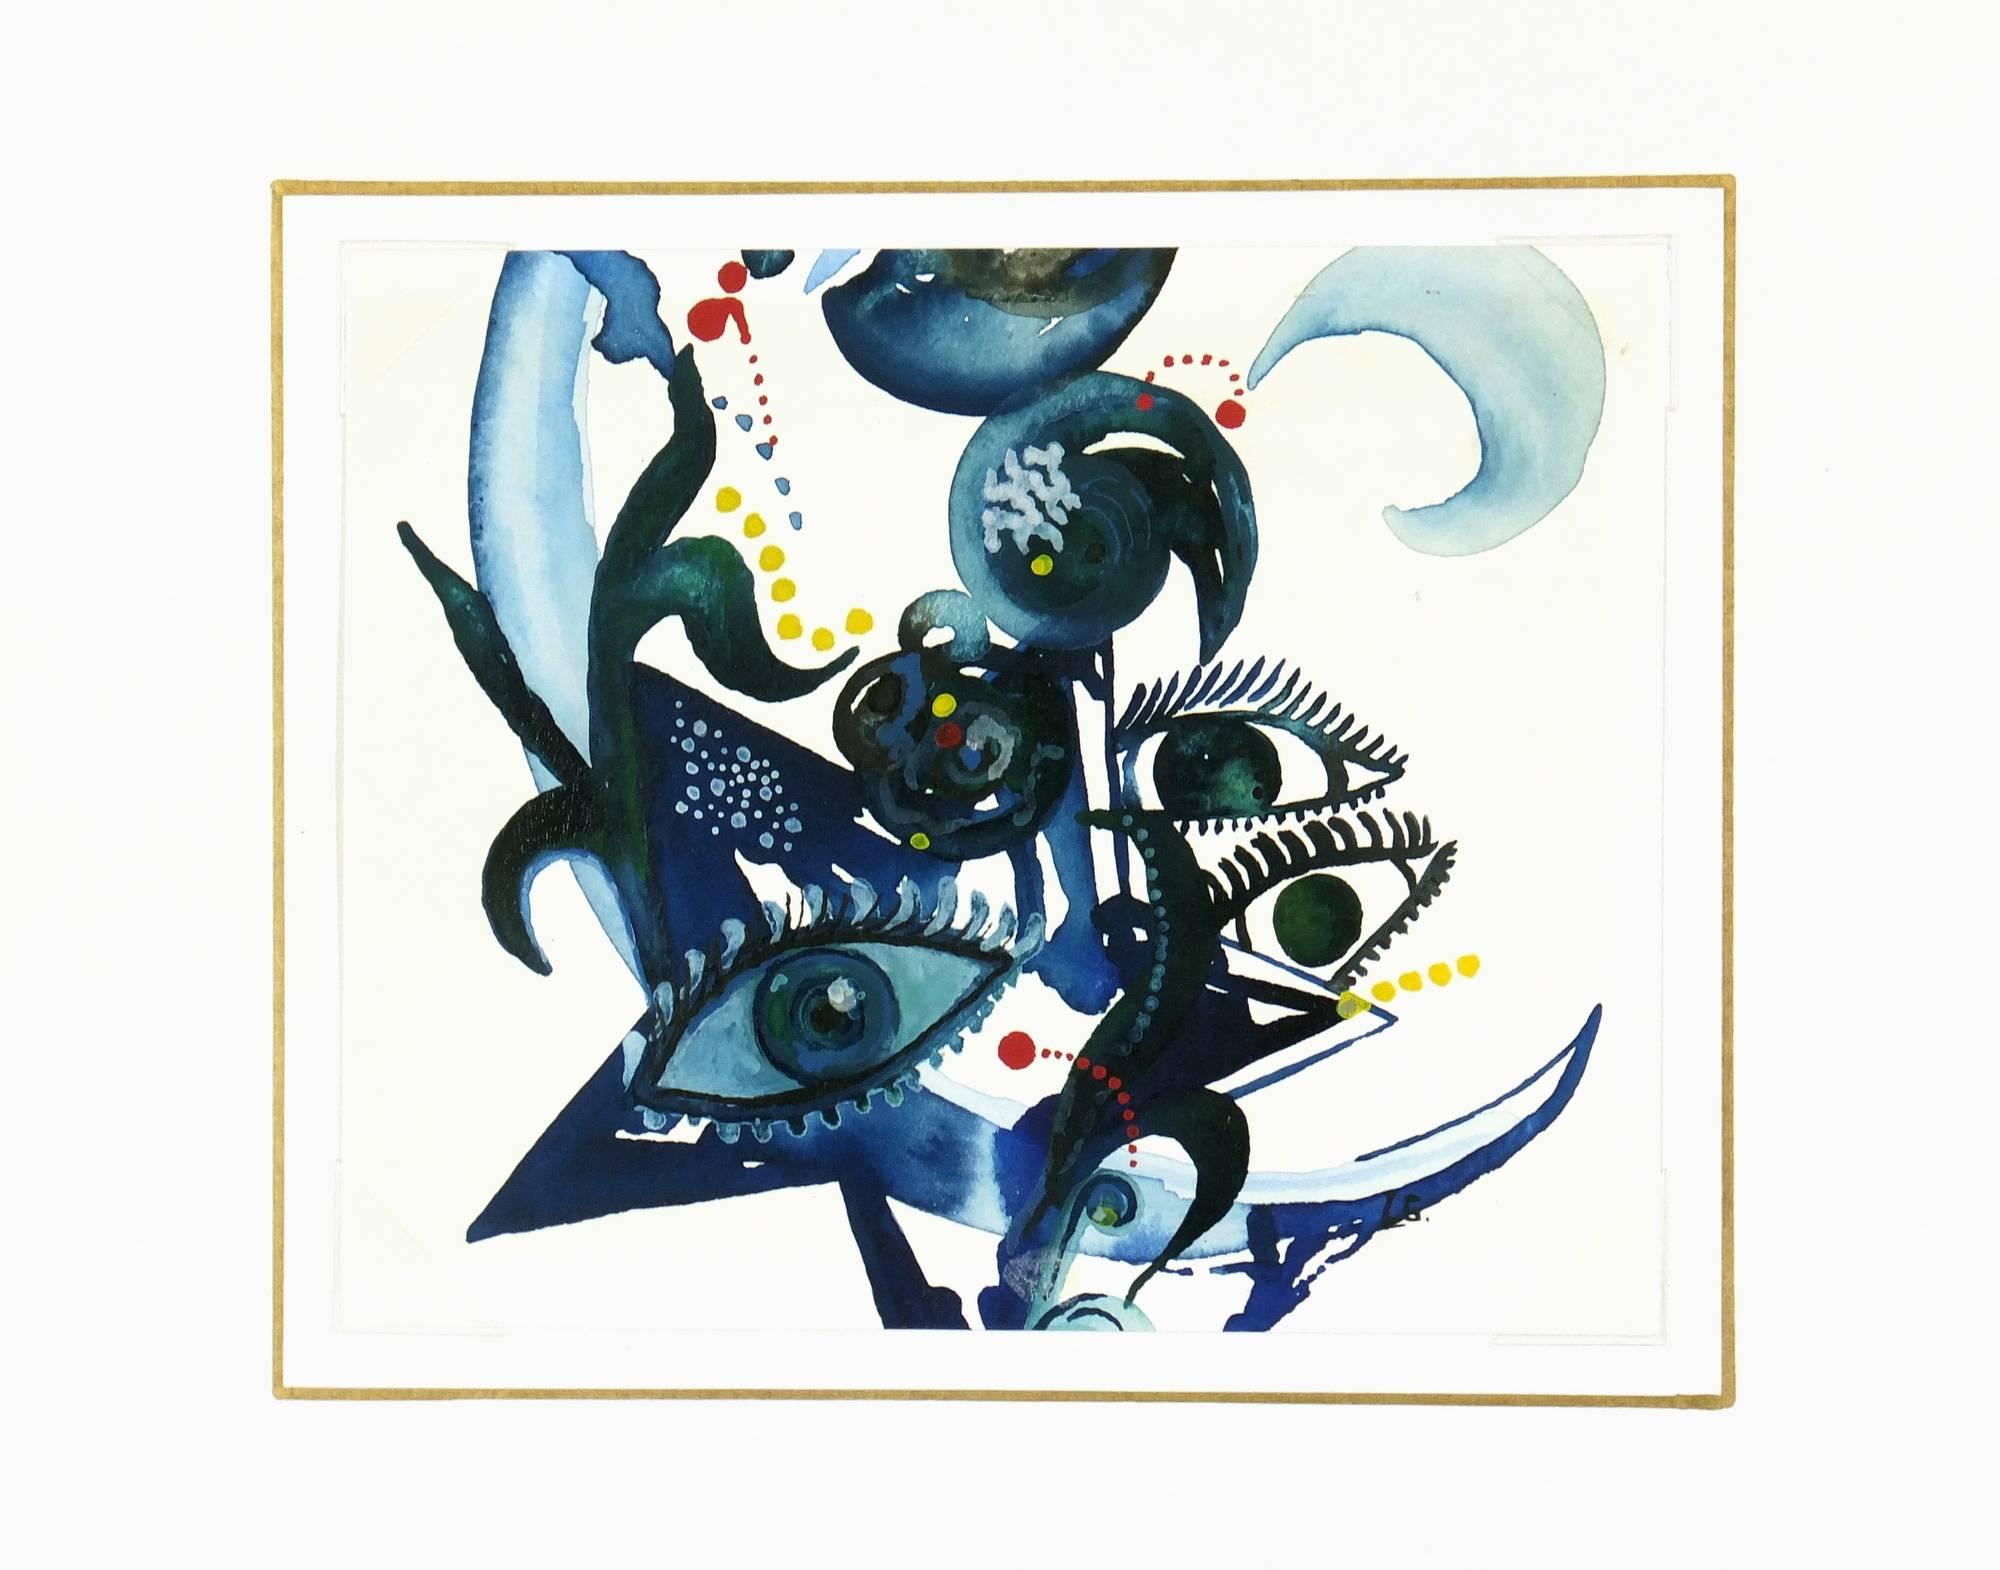 Modern watercolor painting including detailed eyes in blue, 2011.    

Original artwork on paper displayed on a white mat with a gold border. Mat fits a standard-size frame.  Archival plastic sleeve and Certificate of Authenticity included. Artwork,